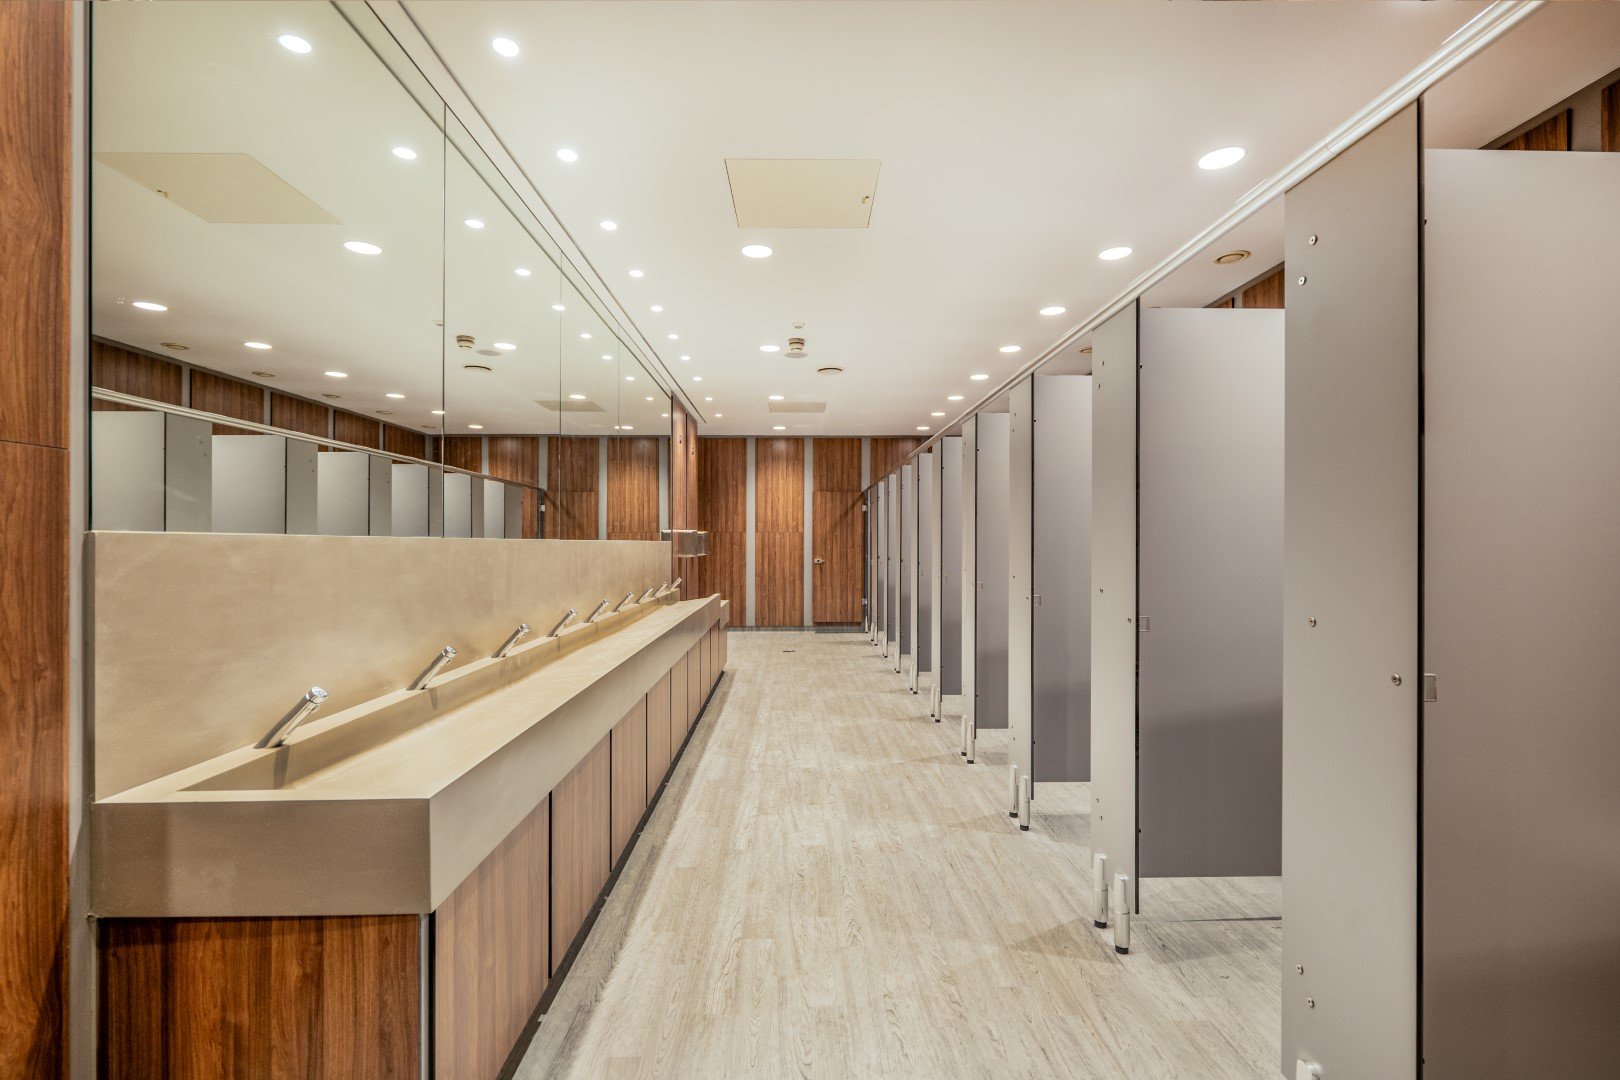  commercial washrooms with toilets and vanity units 